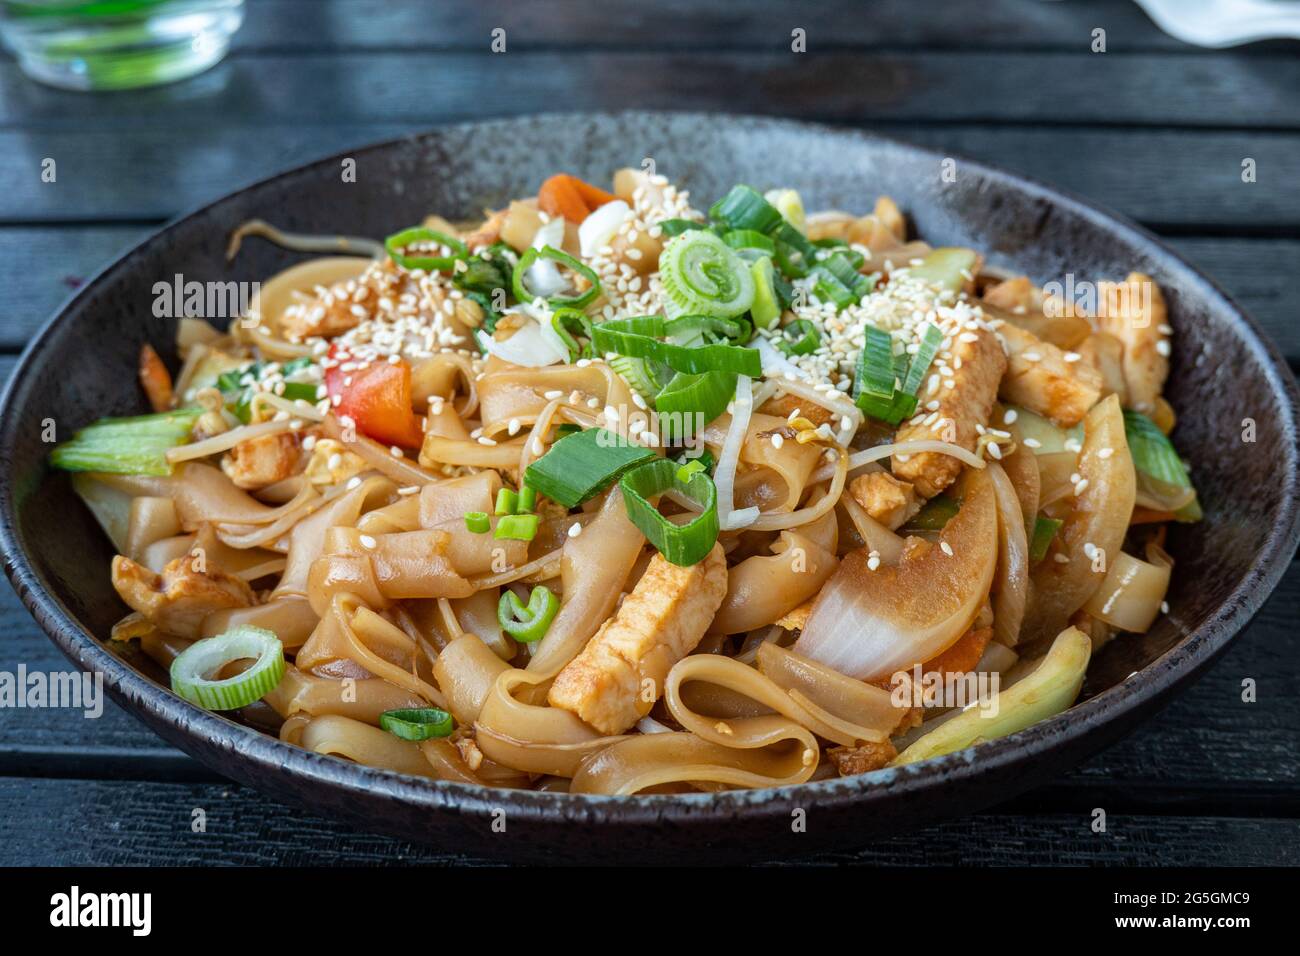 Pan fried noodles with shredded chicken and spring onions Stock Photo